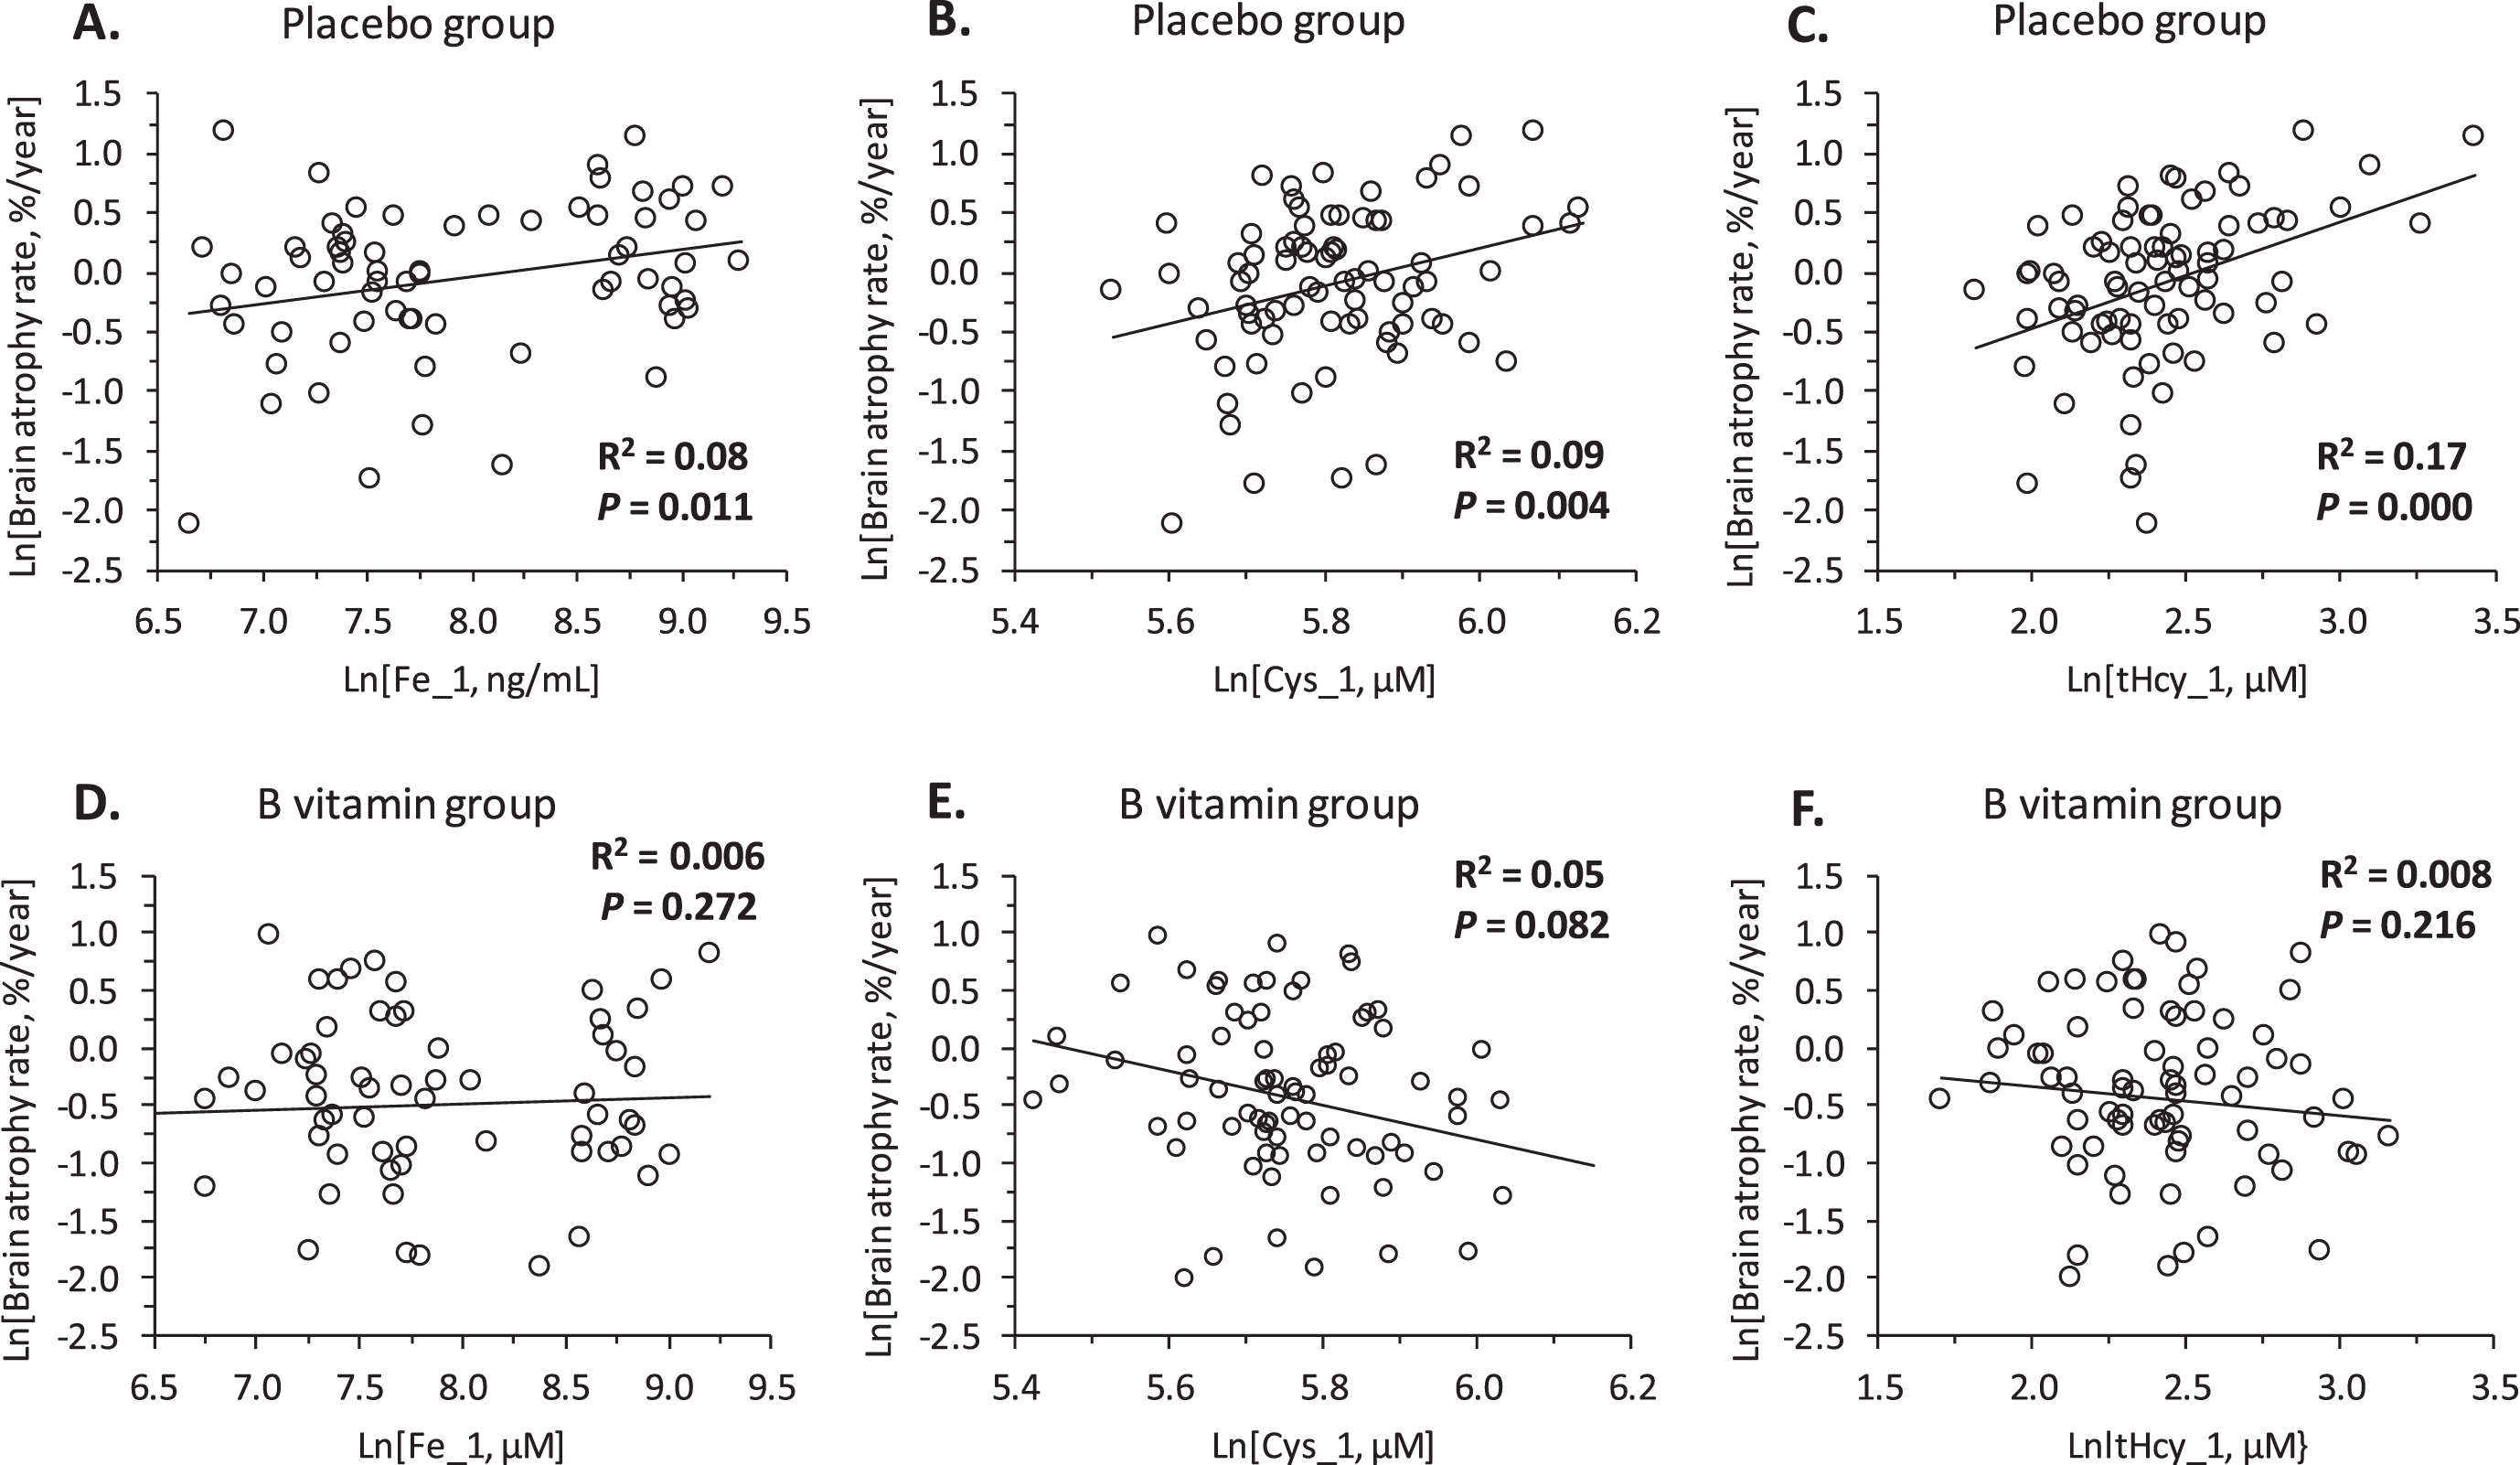 Relationships between brain atrophy rate over two years and baseline concentrations of serum iron (Fe_1: A, D), cysteine (Cys_1: B, E), and homocysteine (tHcy_1: C, F) in MCI individuals. A, B, C) Placebo group; D, E, F) B vitamin group.